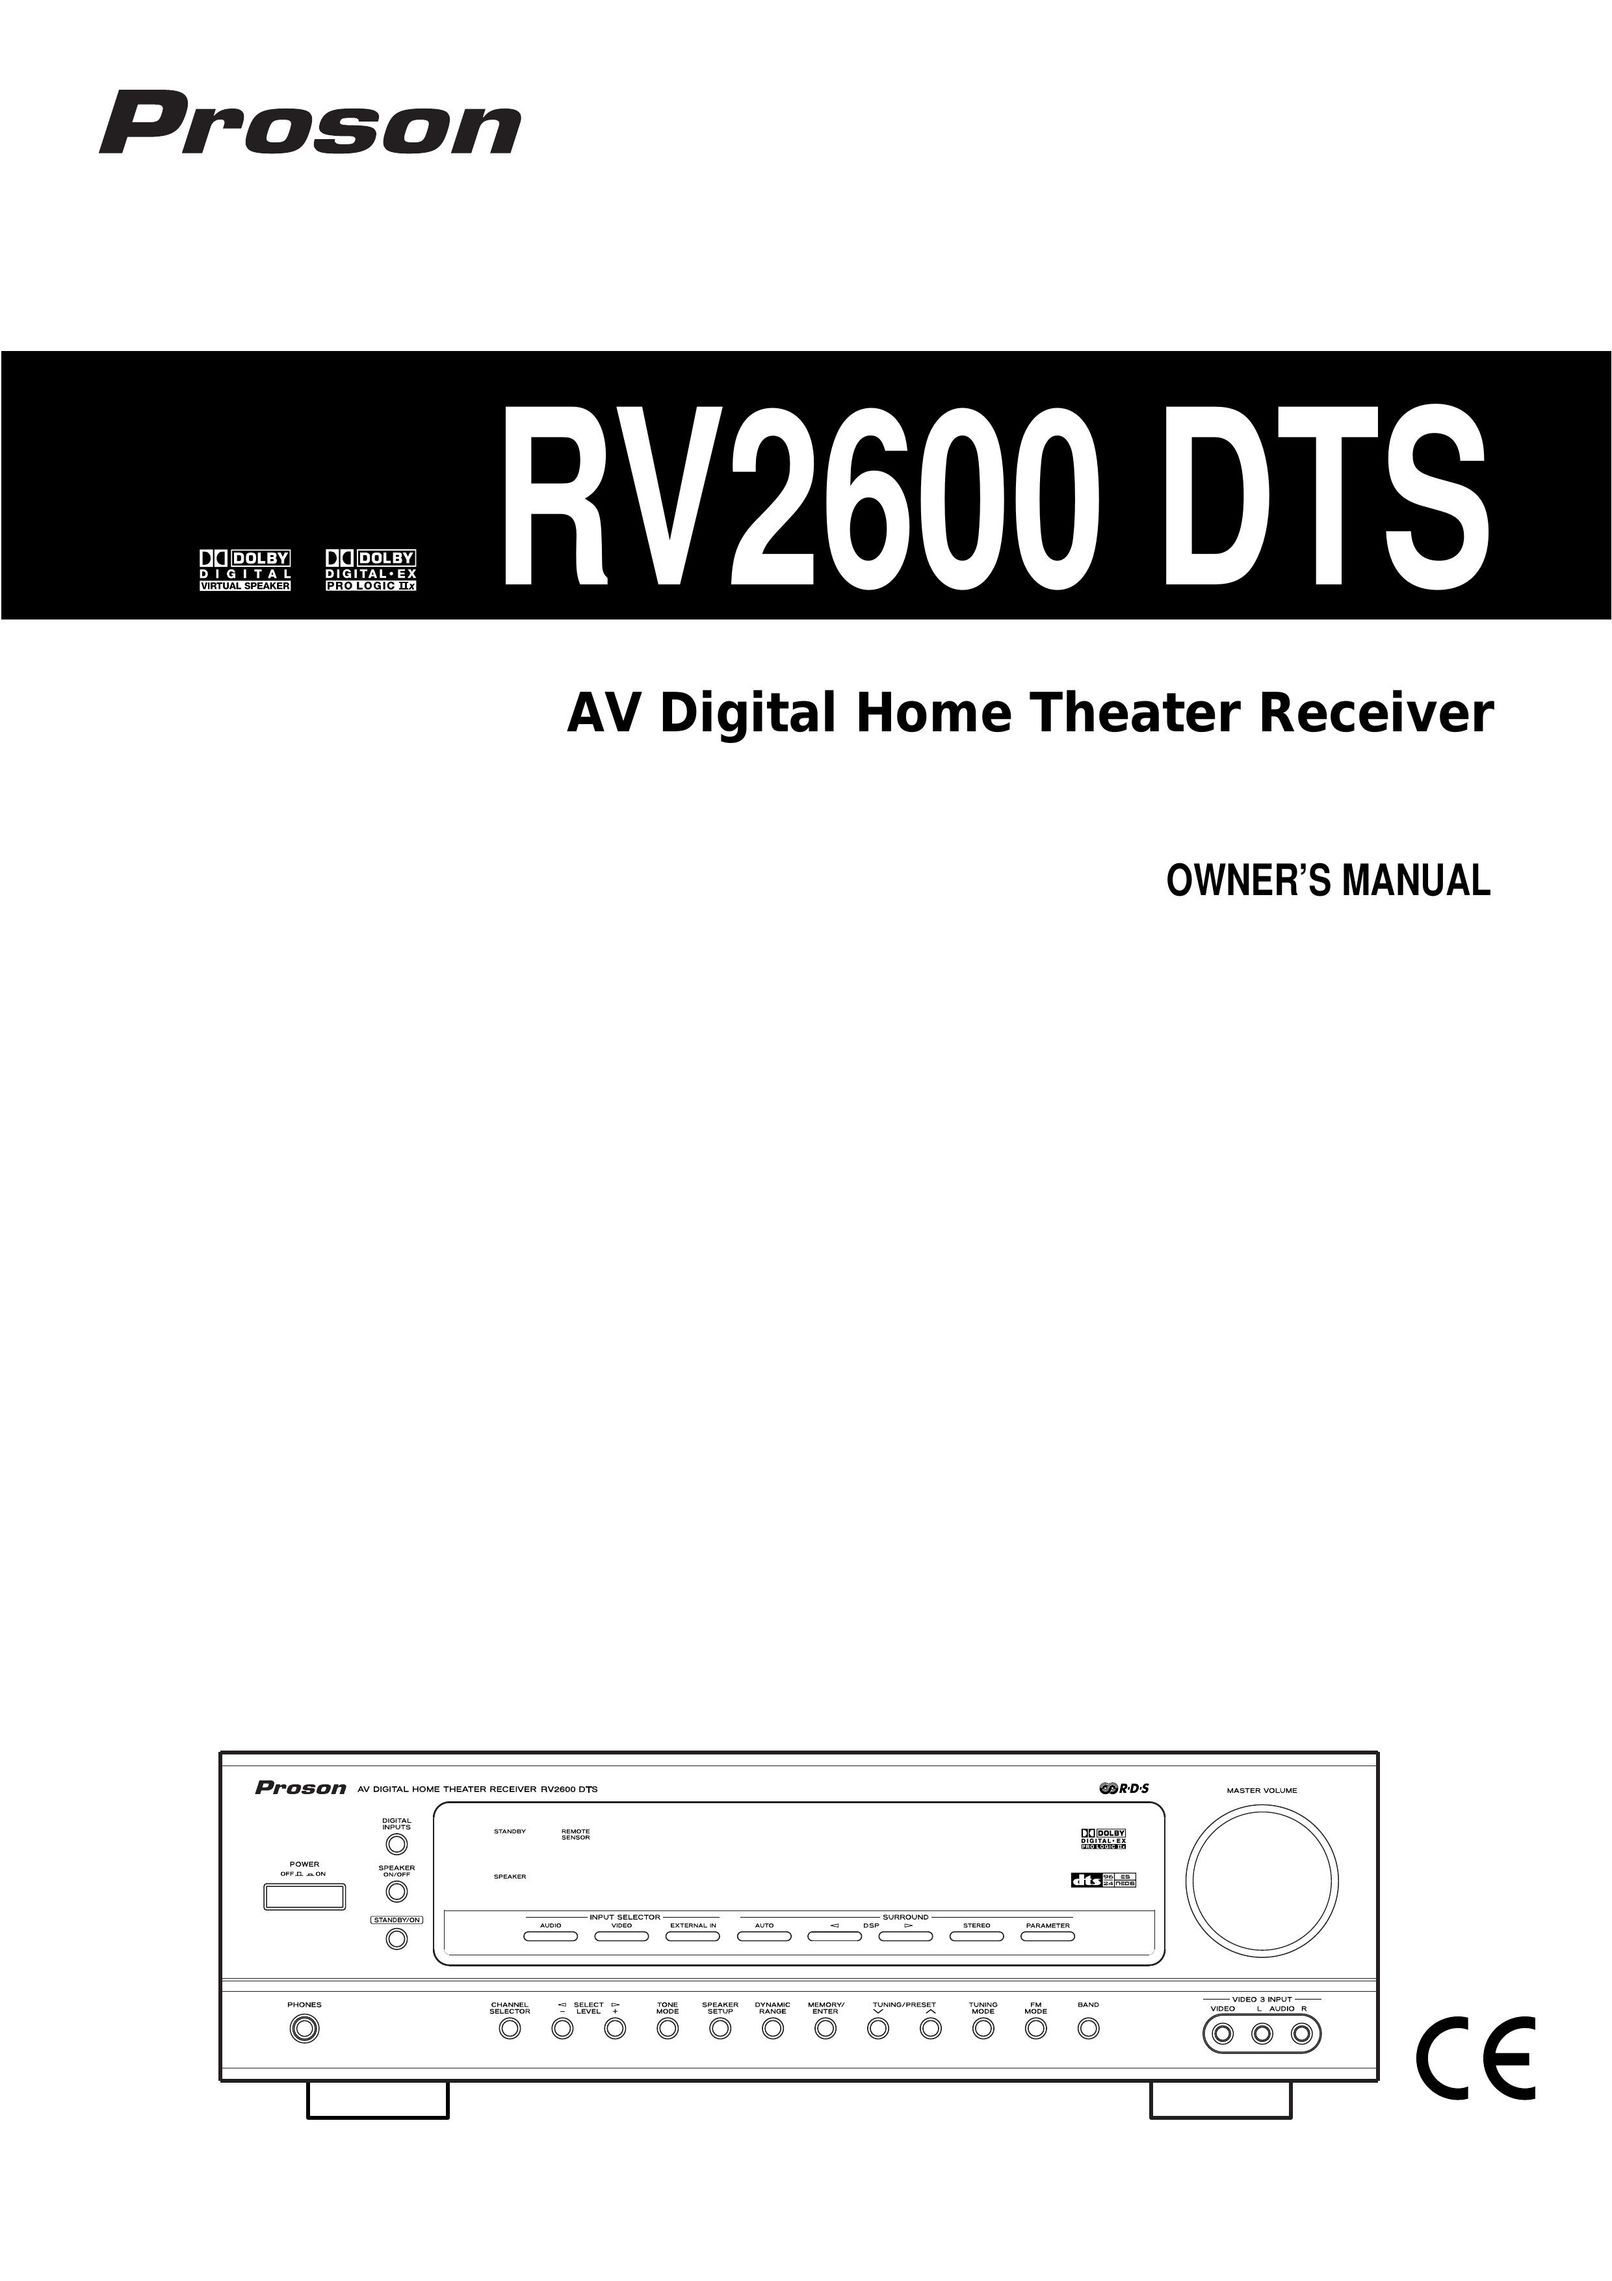 Proson rv2600 dts Home Theater System User Manual